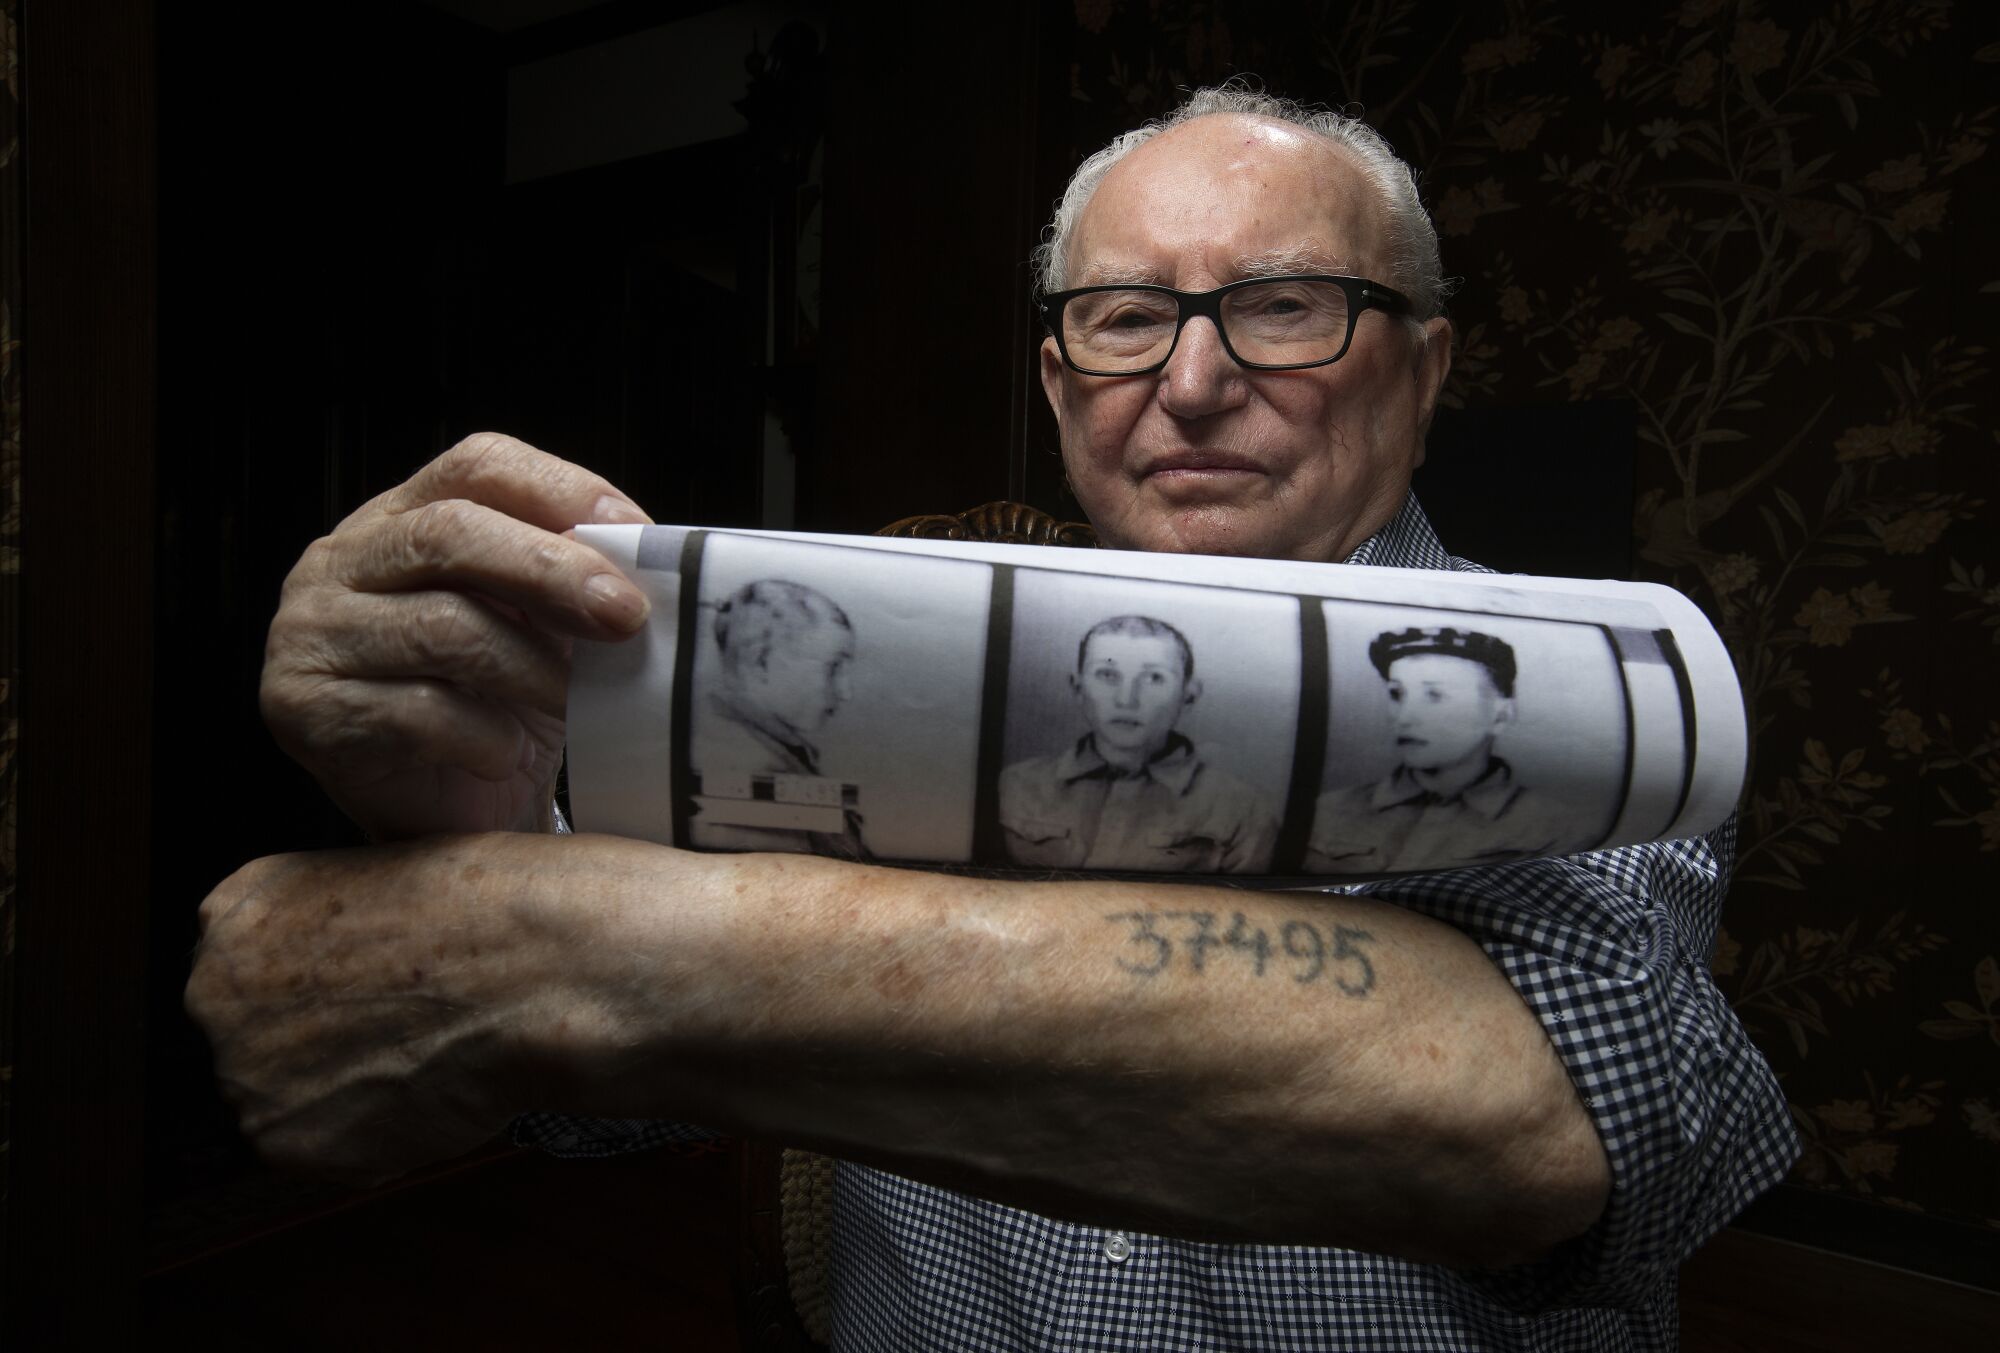 Ralph Hakman shows prisoner photos of himself from 1942, along with his prisoner number that was tattooed on his left arm.